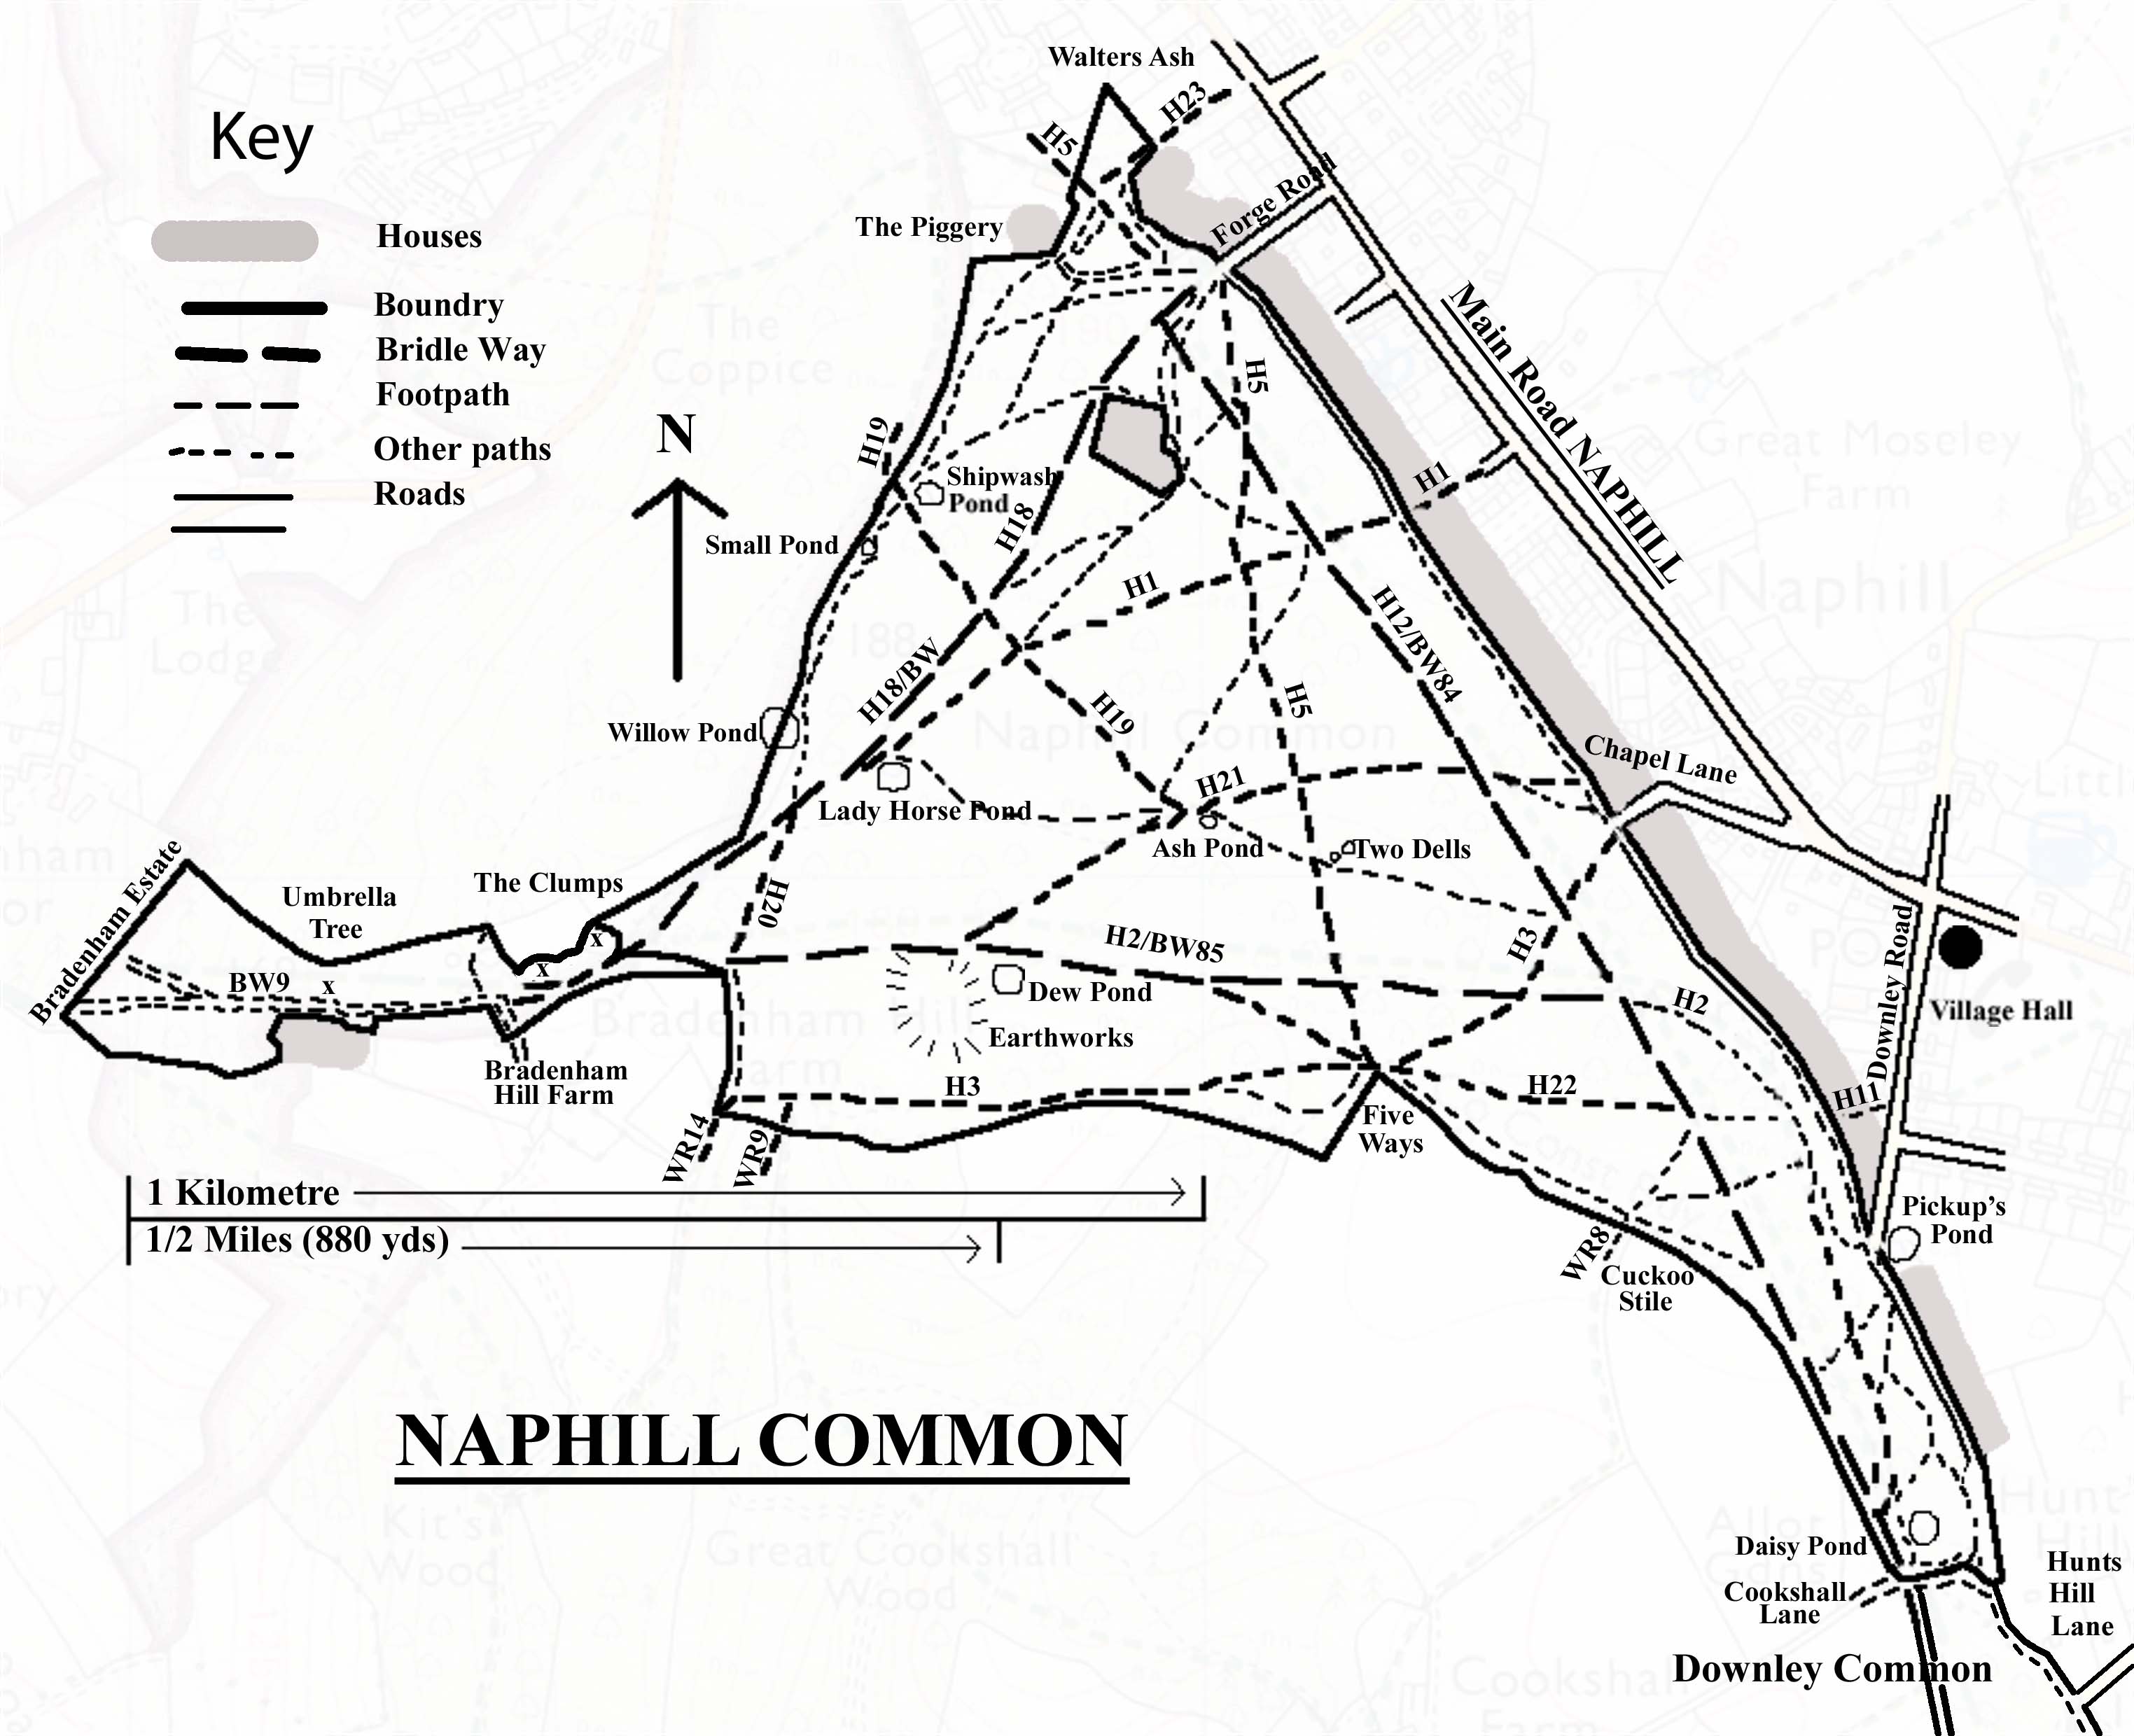 Naphill Common Footpaths